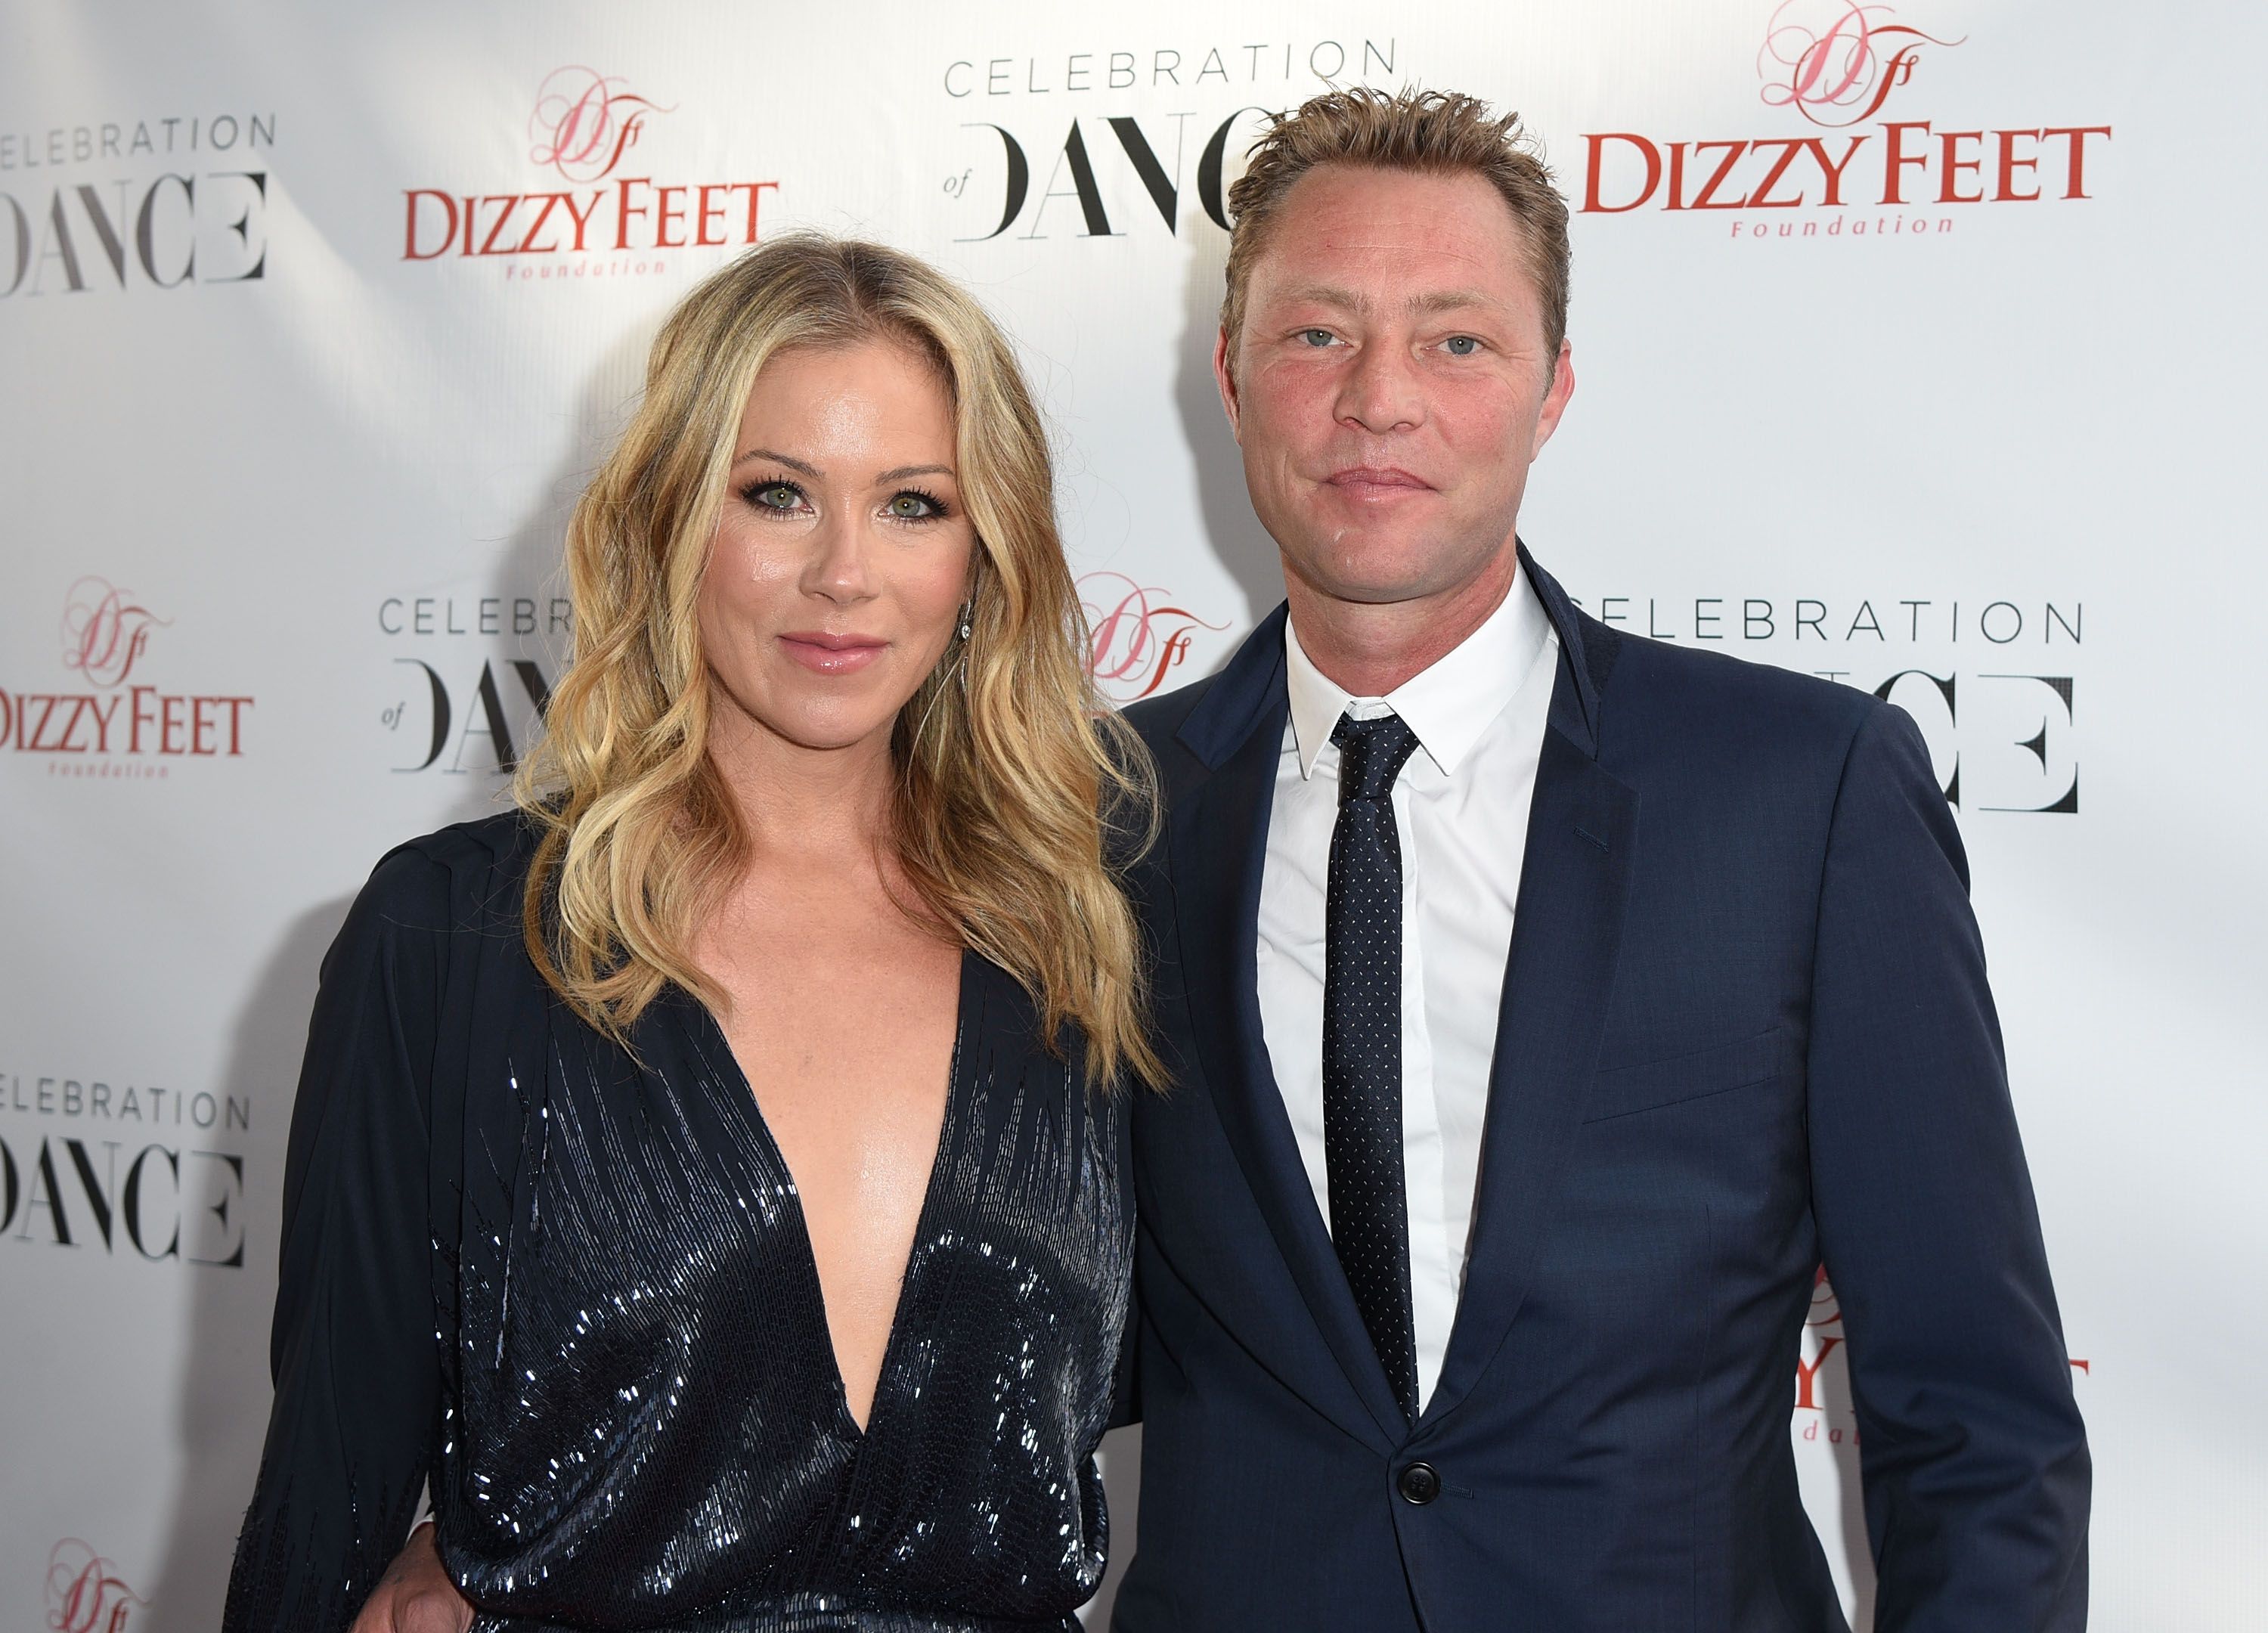 Christina Applegate and Martyn LeNoble during the 5th Annual Celebration of Dance Gala presented By The Dizzy Feet Foundation at Club Nokia on August 1, 2015 in Los Angeles, California. | Source: Getty Images